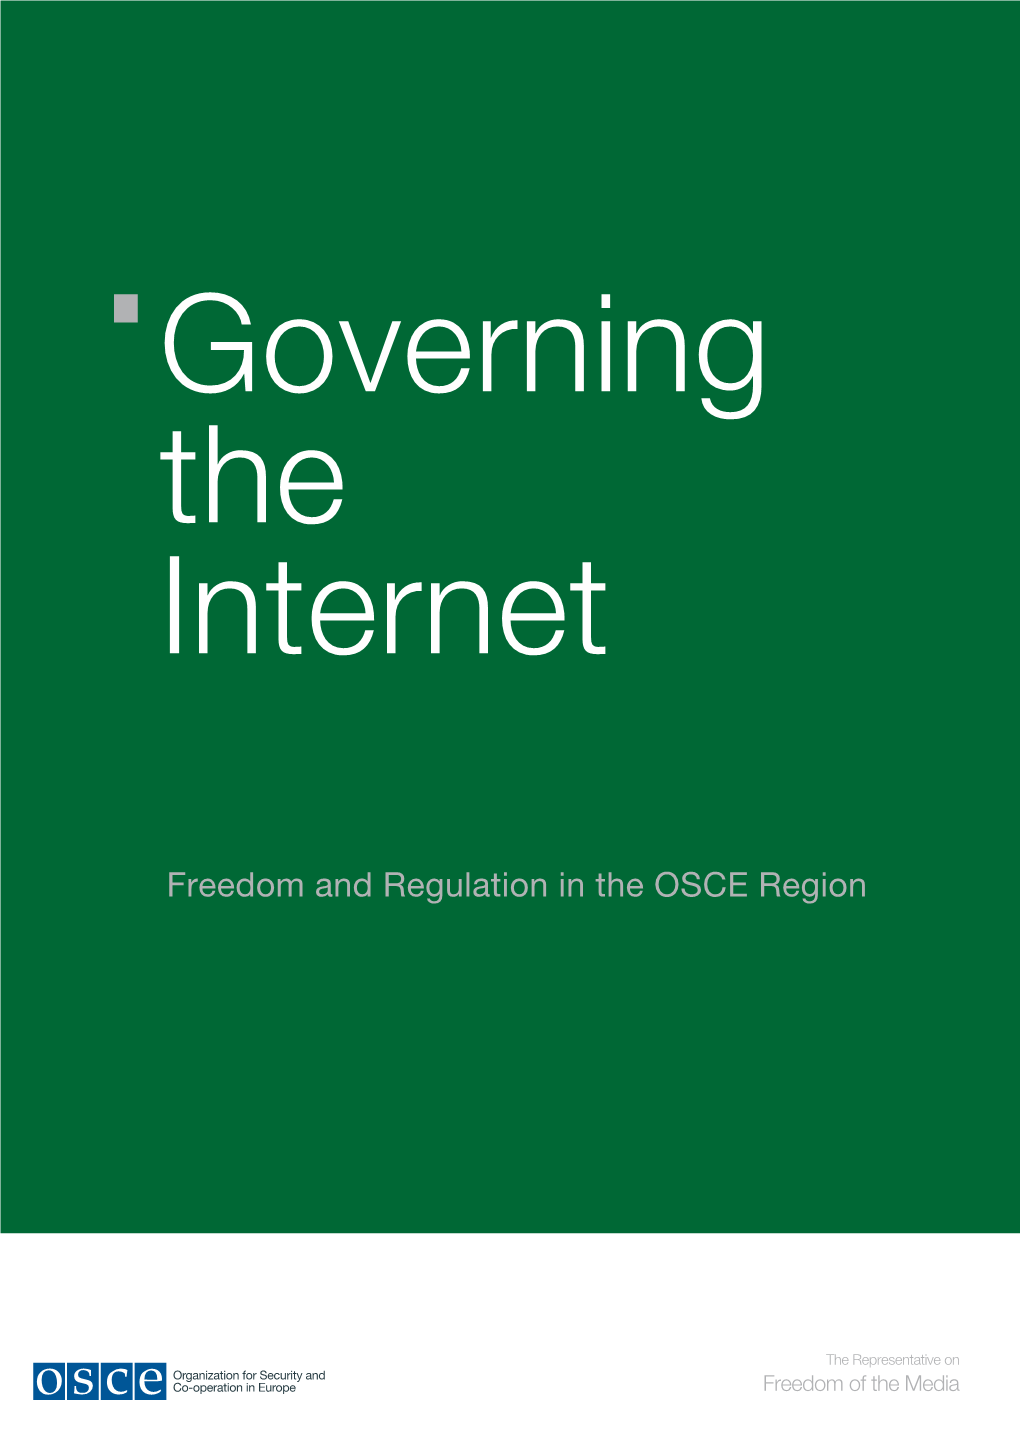 Governing the Internet. Freedom and Regulation in the OSCE Region